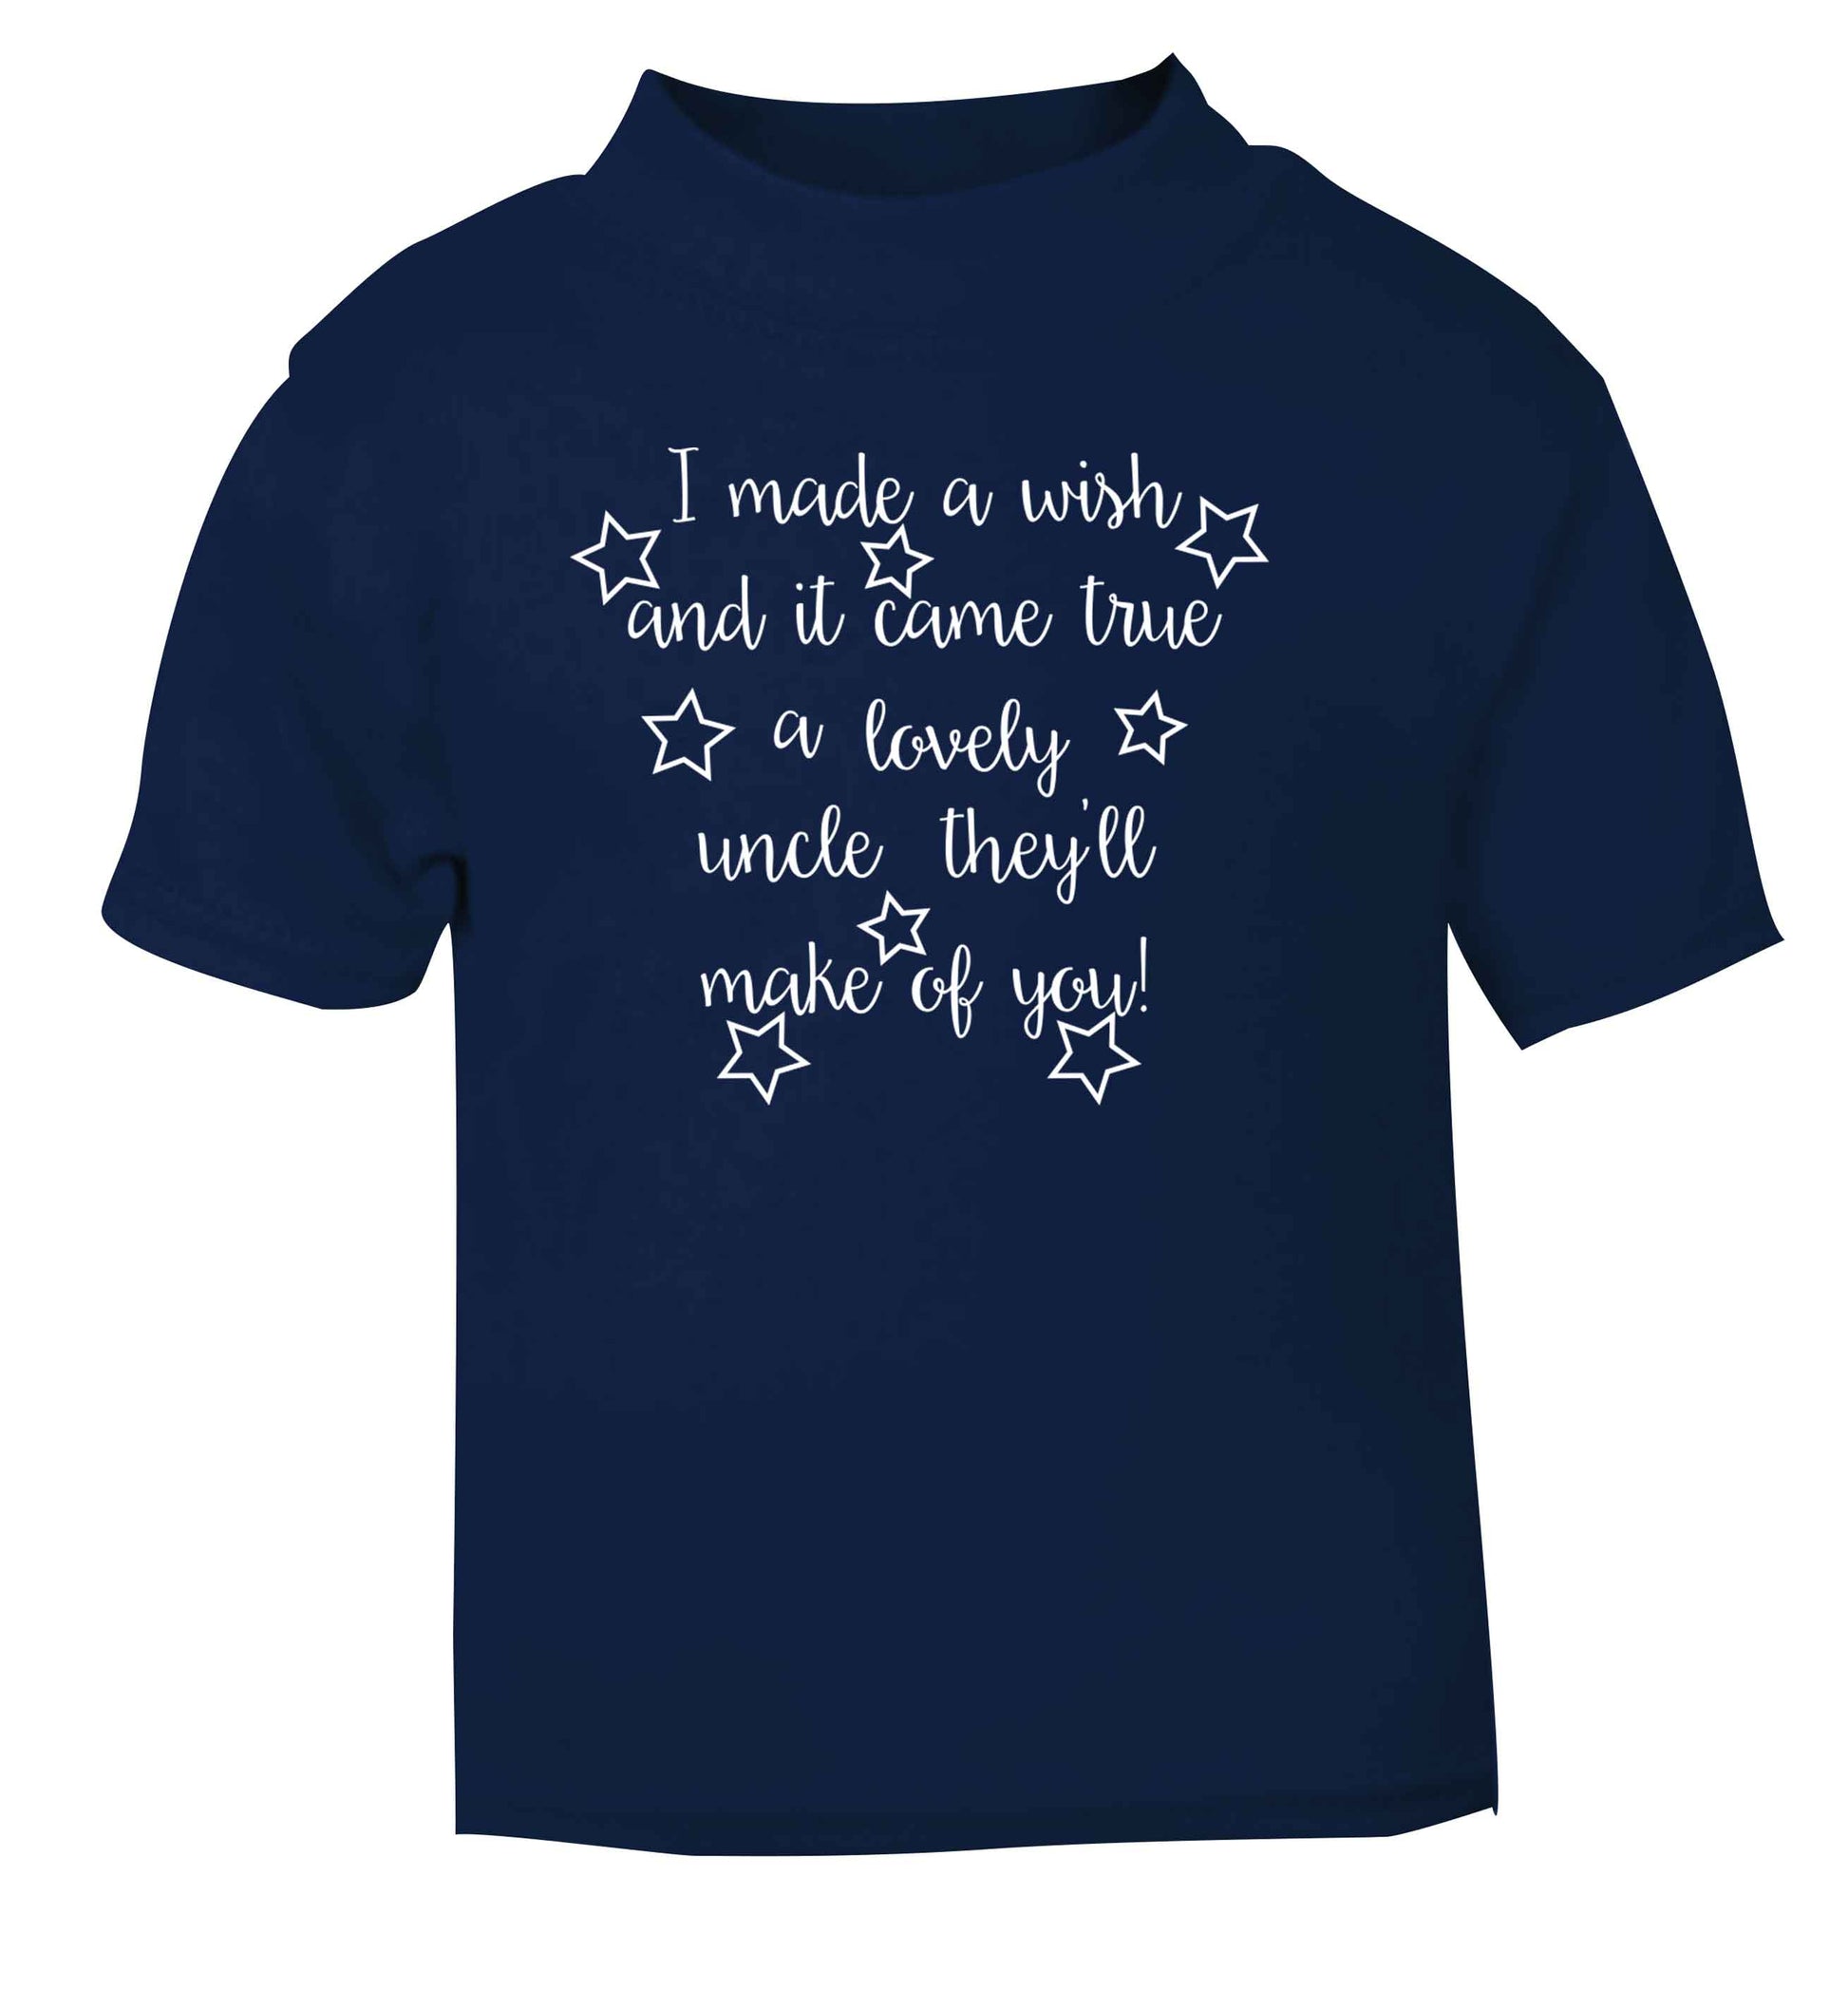 I made a wish and it came true a lovely uncle they'll make of you! navy Baby Toddler Tshirt 2 Years